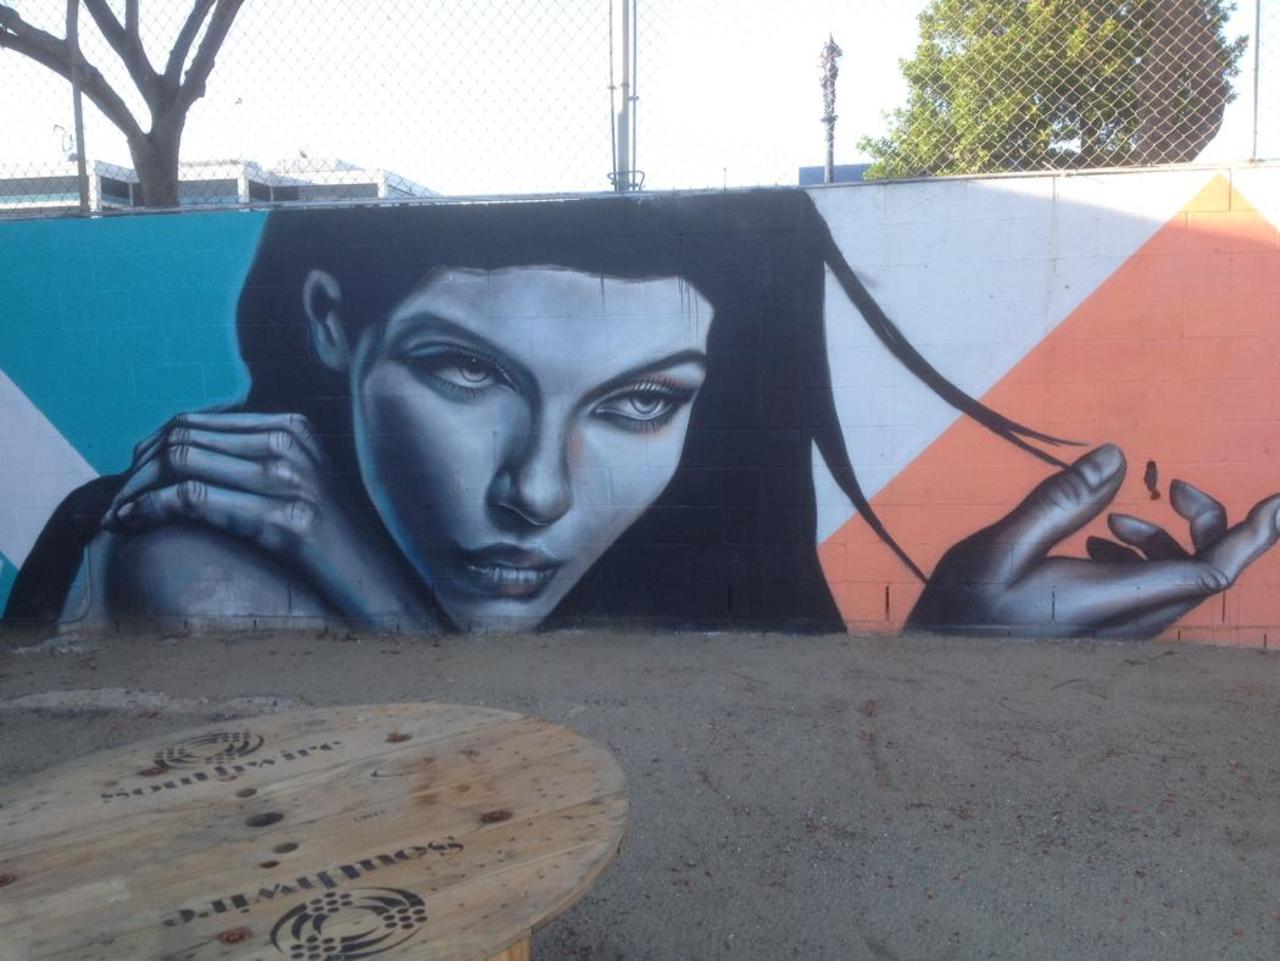 Pure beauty captured and frozen in time. #Streetart portrait in downtown #SanDiego. #Graffiti photo by me! http://t.co/MoXDZG4OTY